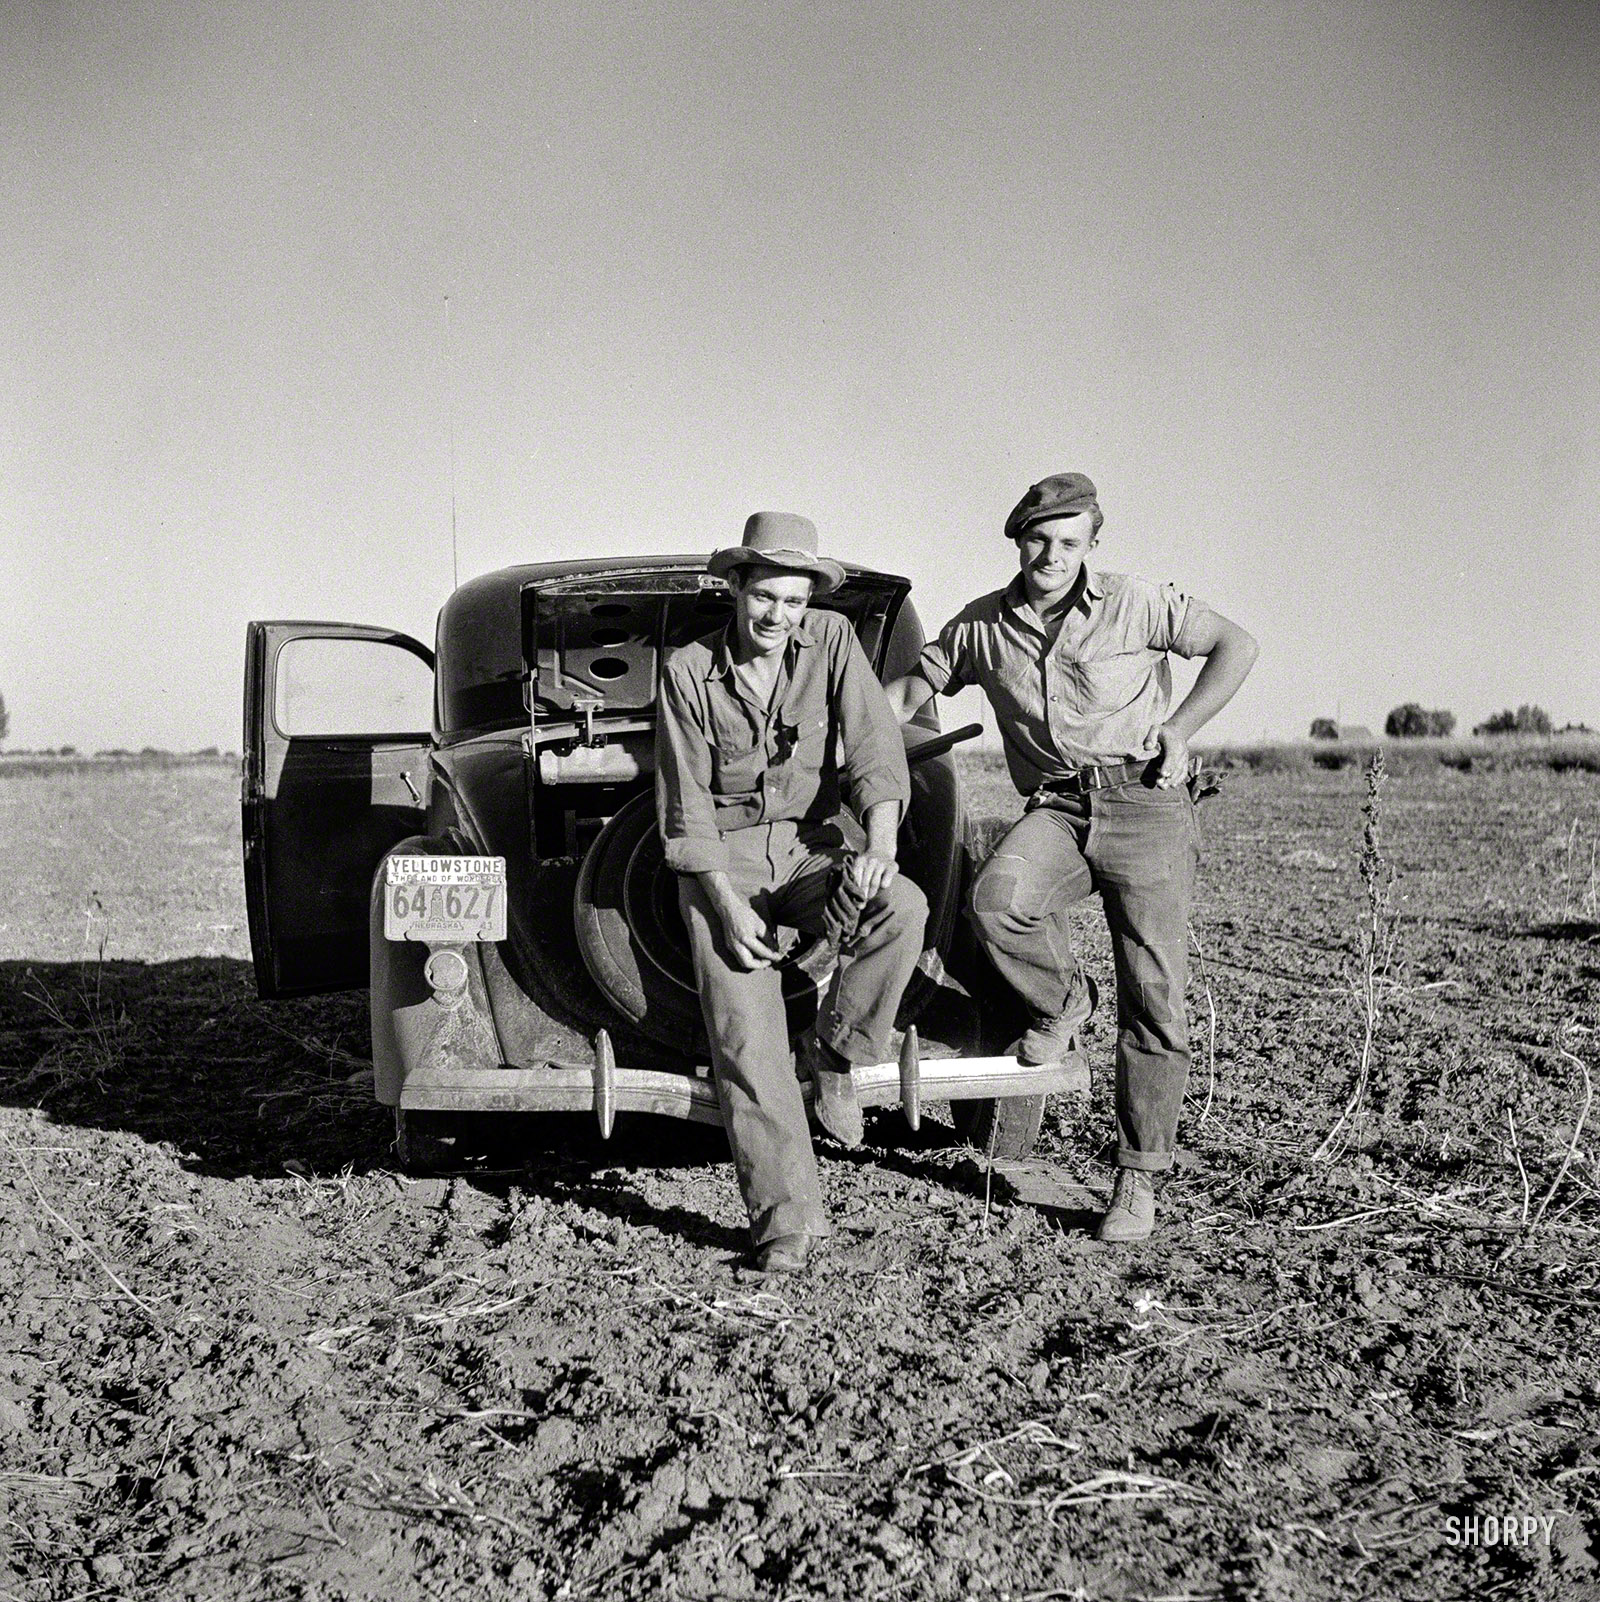 An uncaptioned photo taken by Marion Post Wolcott in September 1941 whose neighbors show bean-threshing activities in the North Platte River Valley of Nebraska. So we'll call these guys the Legume Brothers. View full size.